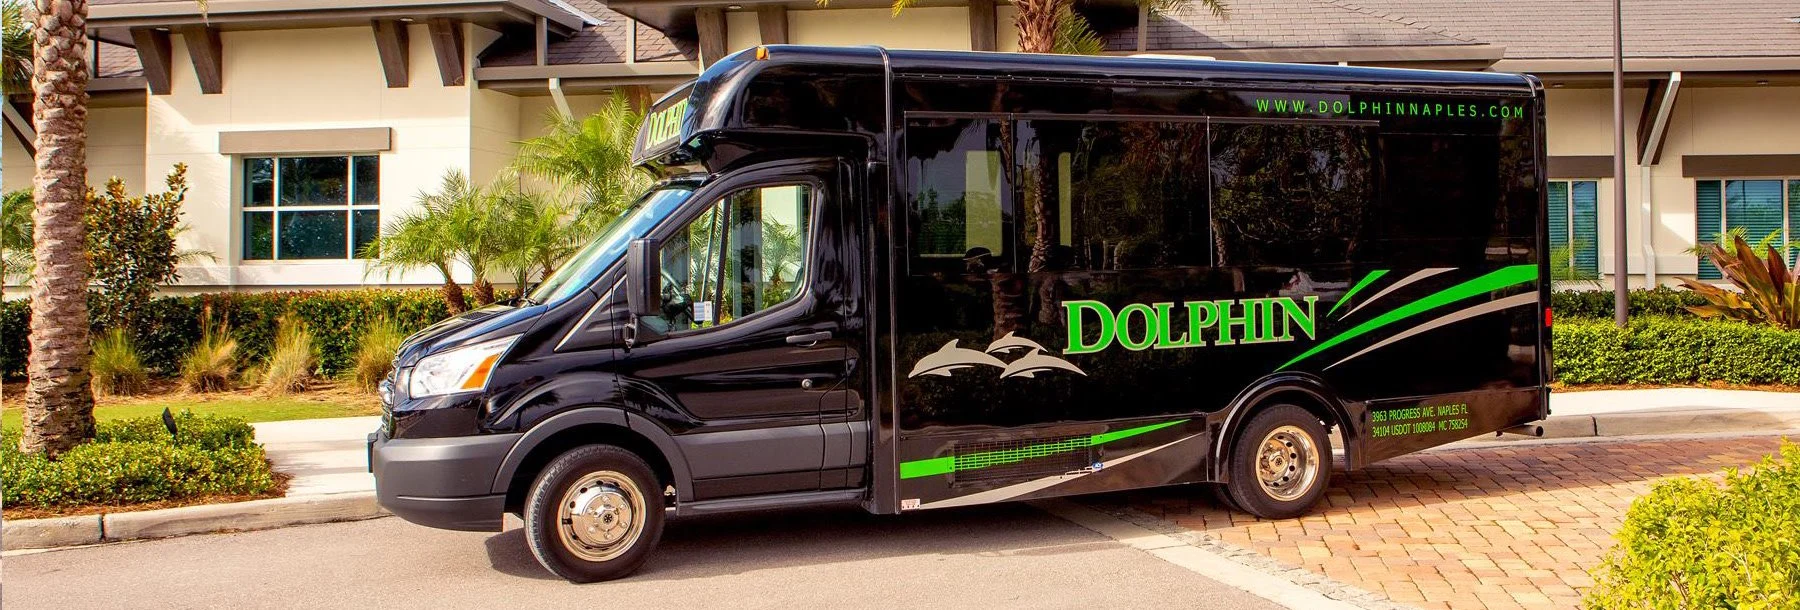 Dolphin Transportation trains new drivers 3 times faster with AI Dash Cams